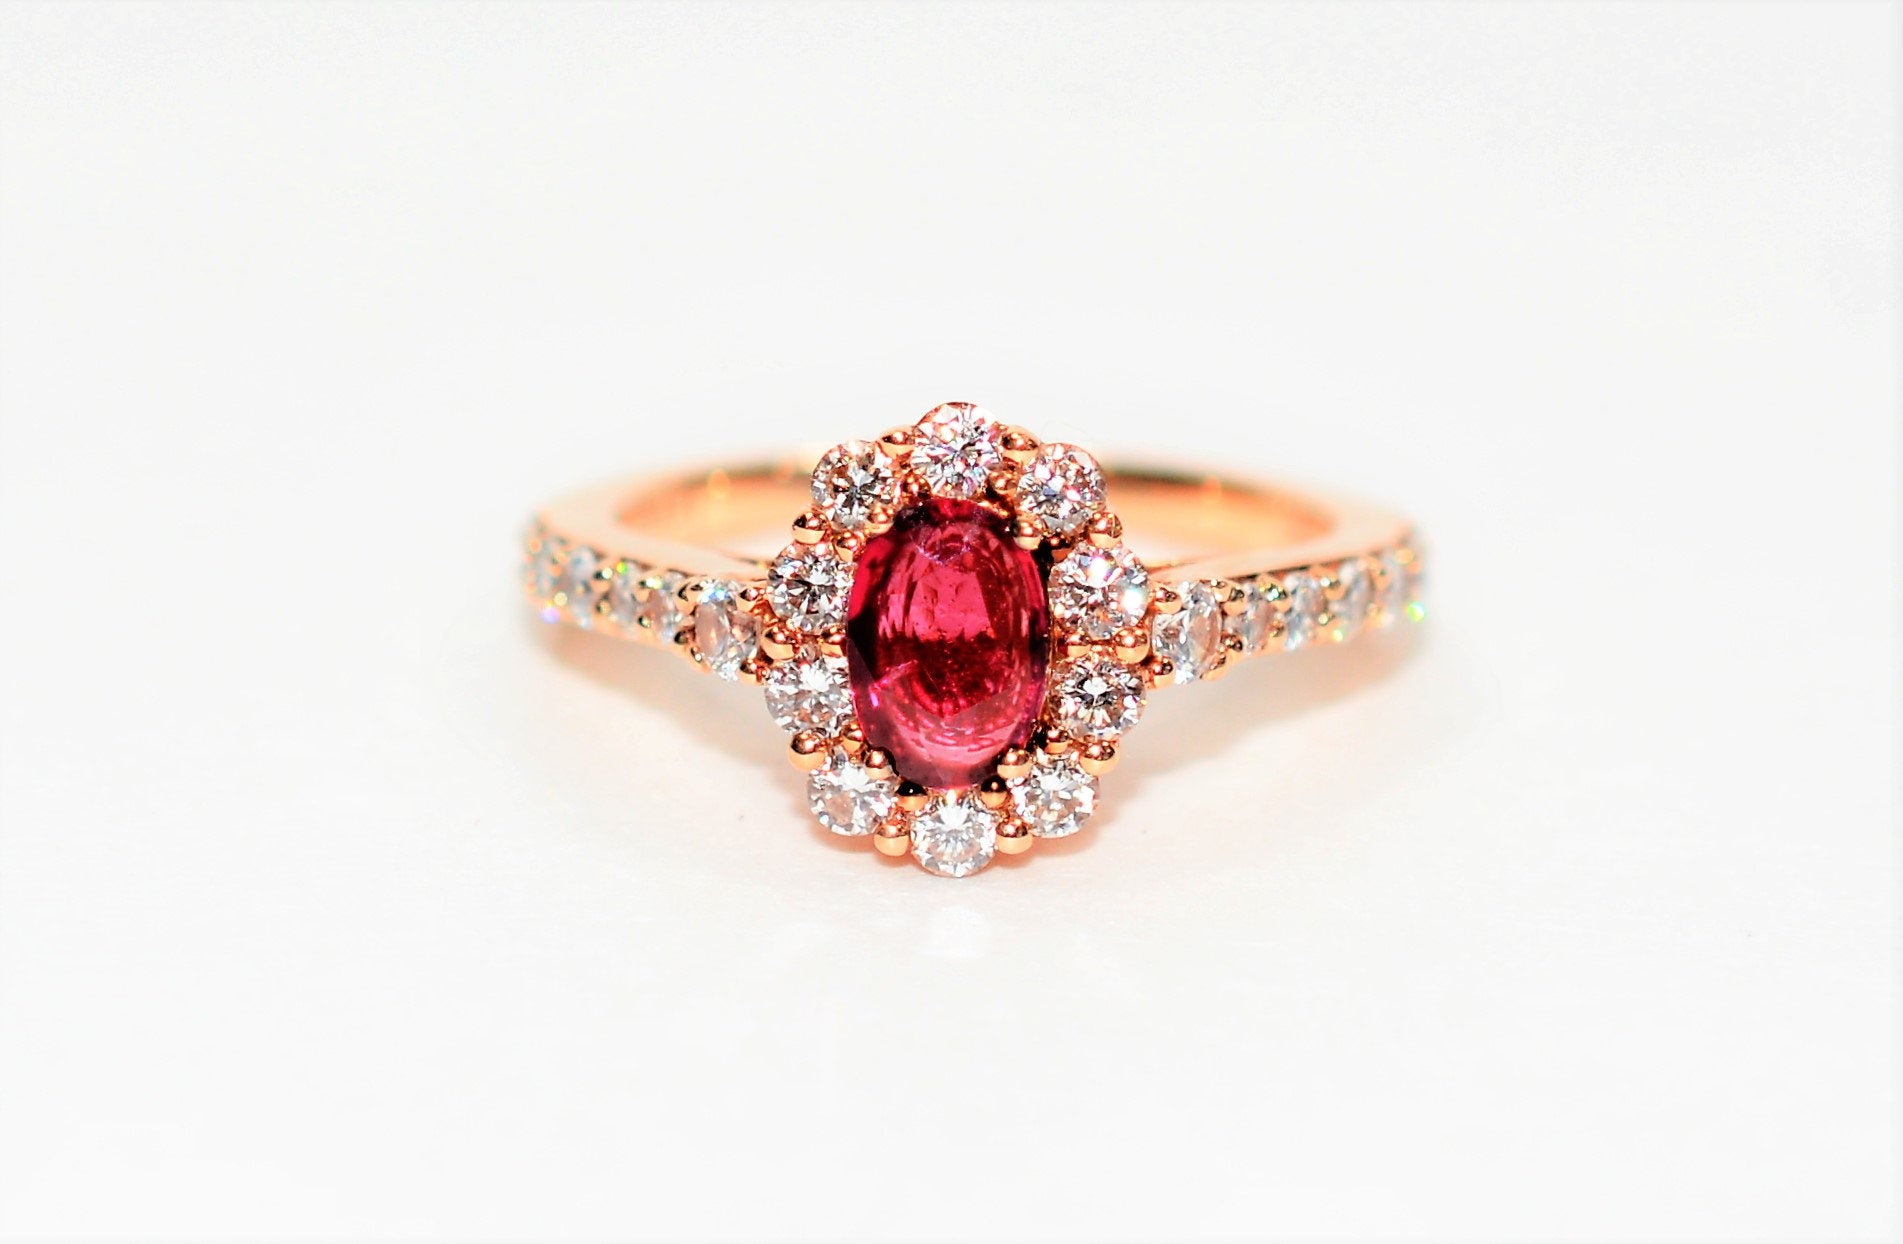 LeVian Natural Ruby & Diamond Ring 14K Rose Gold 1.06tcw Ruby Ring Engagement Ring July Birthstone Ring Diamond Halo Ring LeVian Bridal Ring